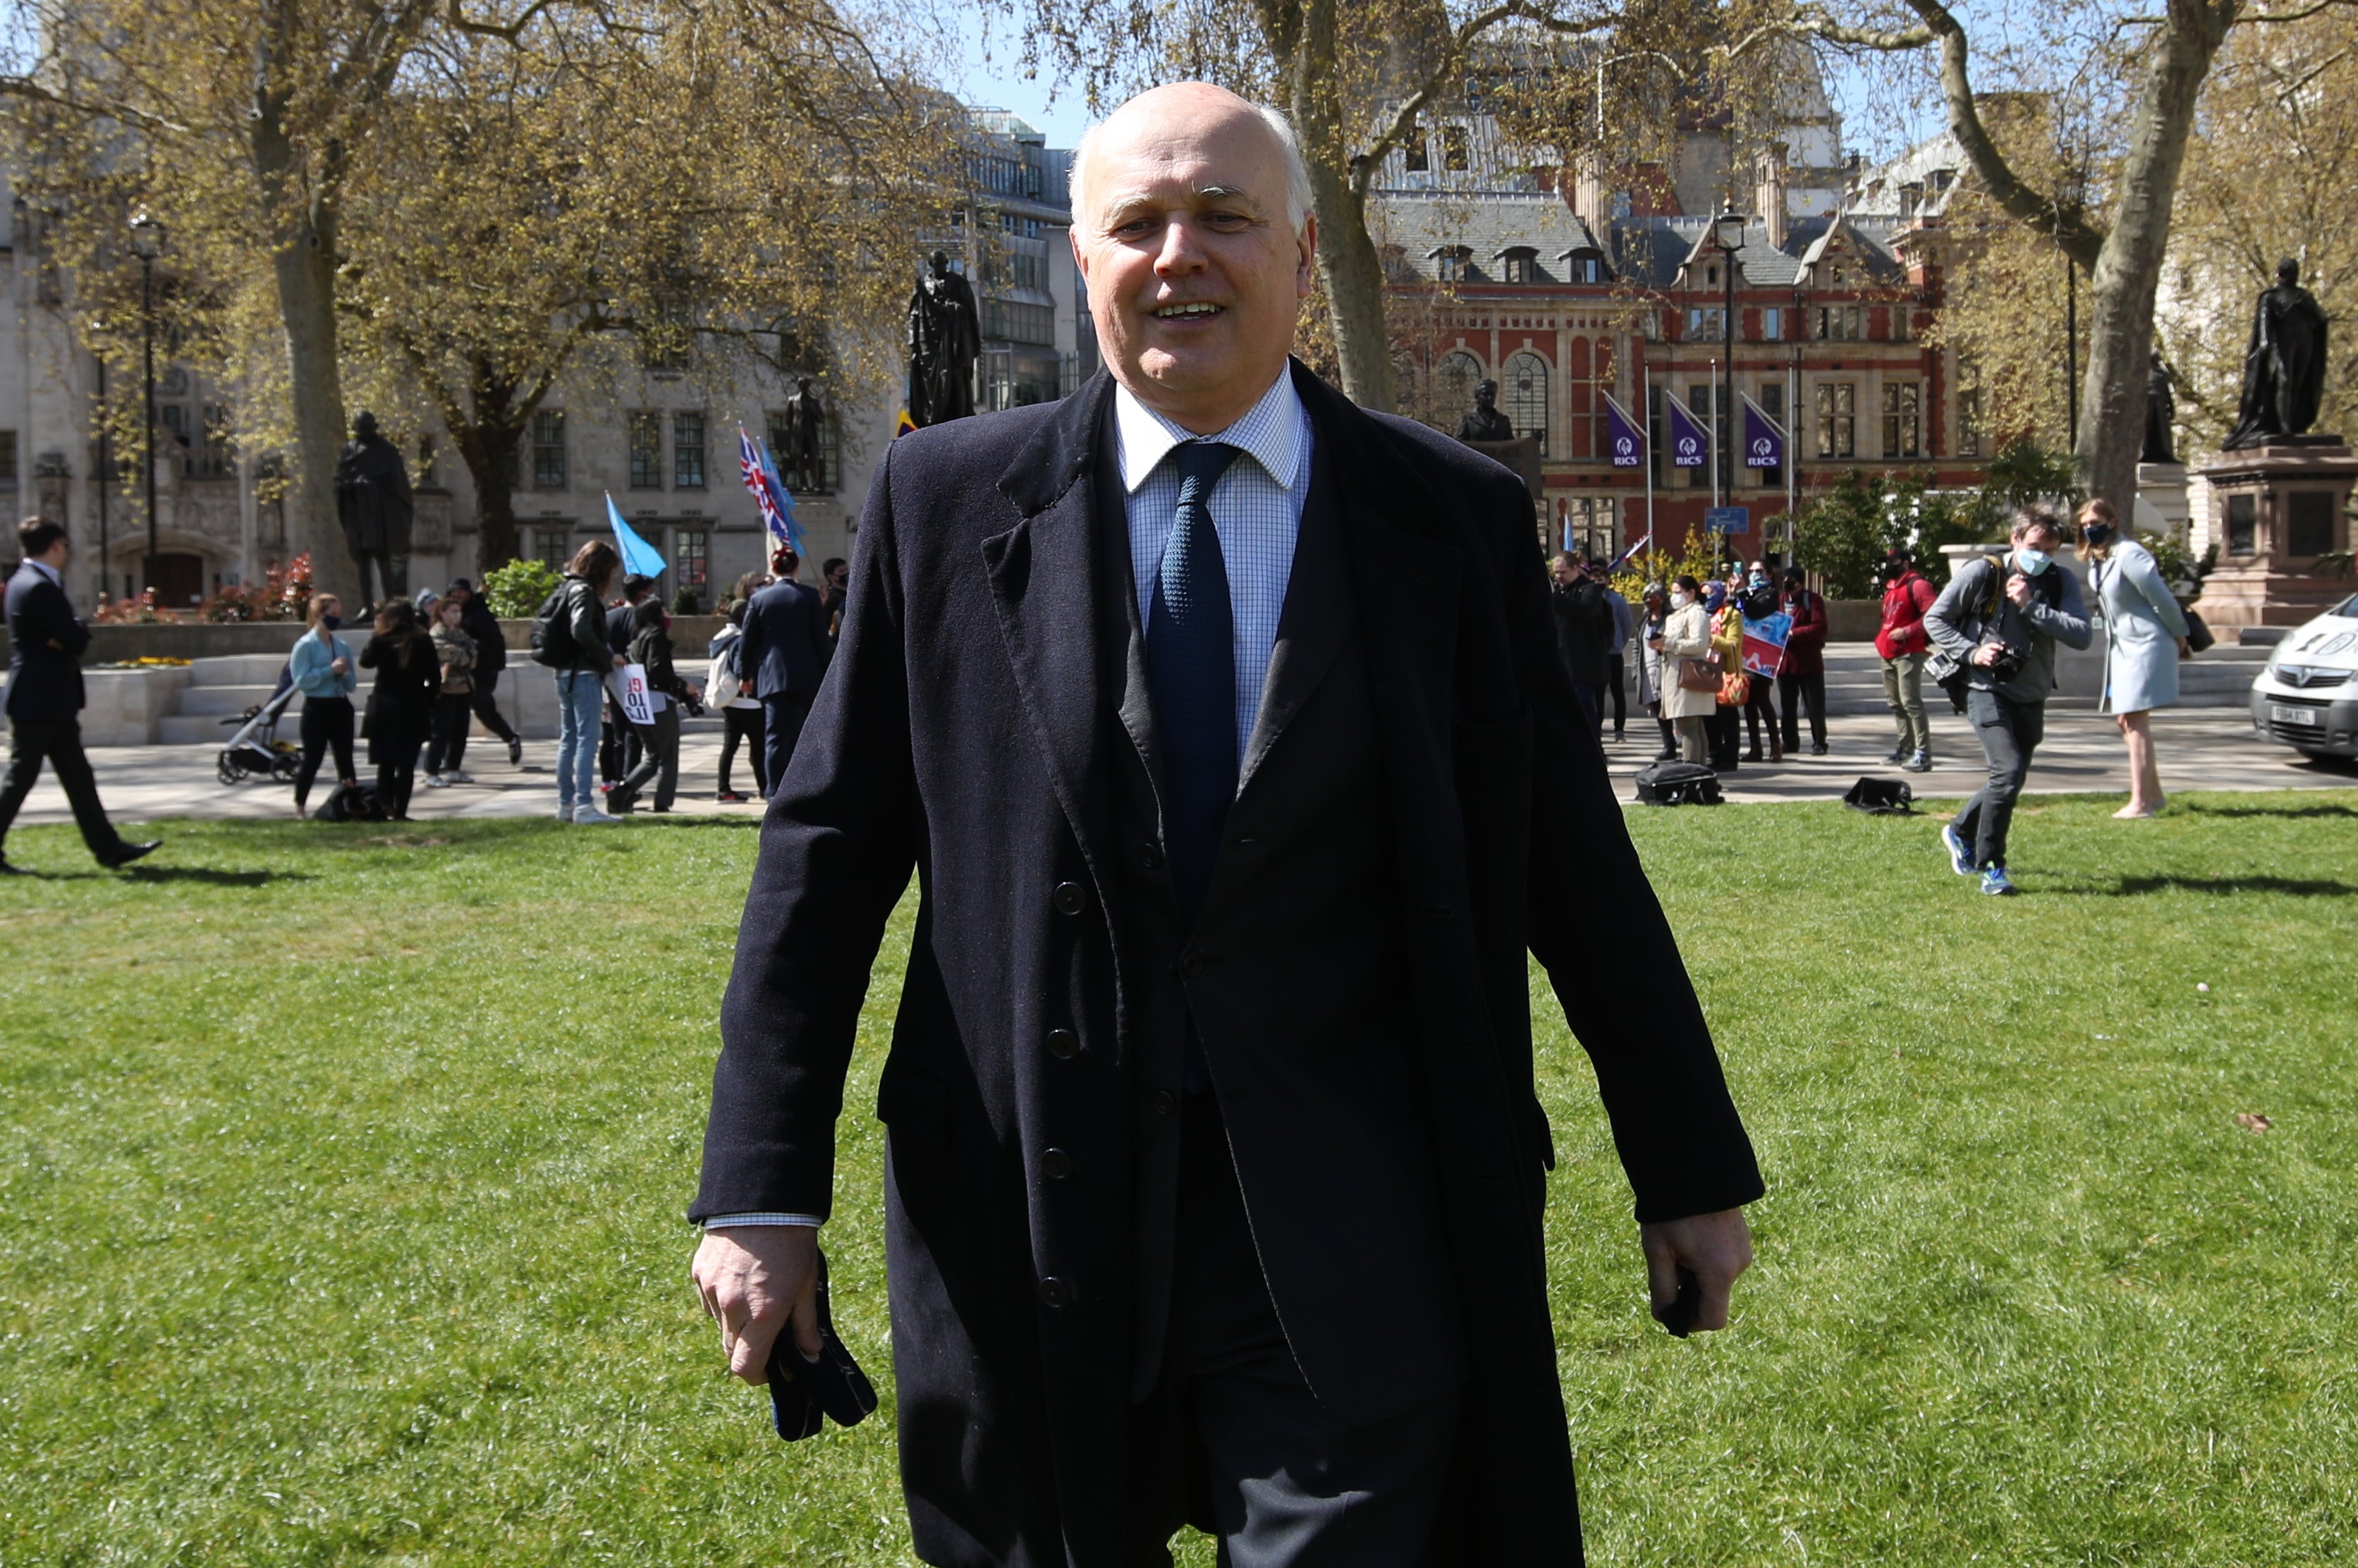 Iain Duncan Smith said ‘we have to have all this information out’